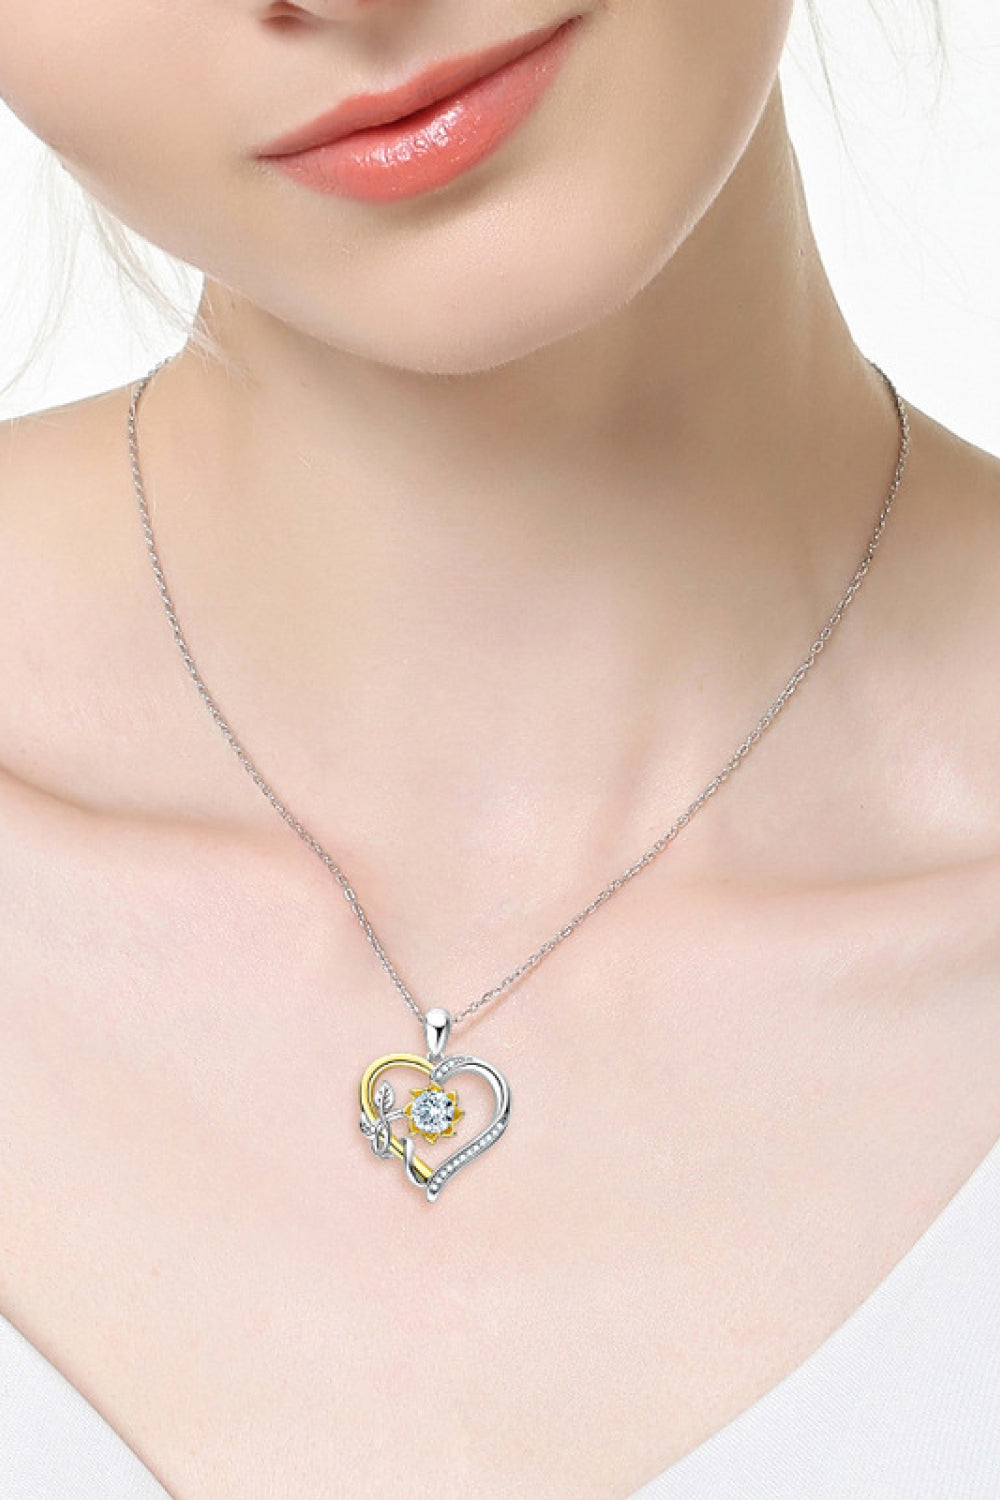 Two-Tone 1 Carat Moissanite Heart Pendant Necklace - Necklaces - FITGGINS